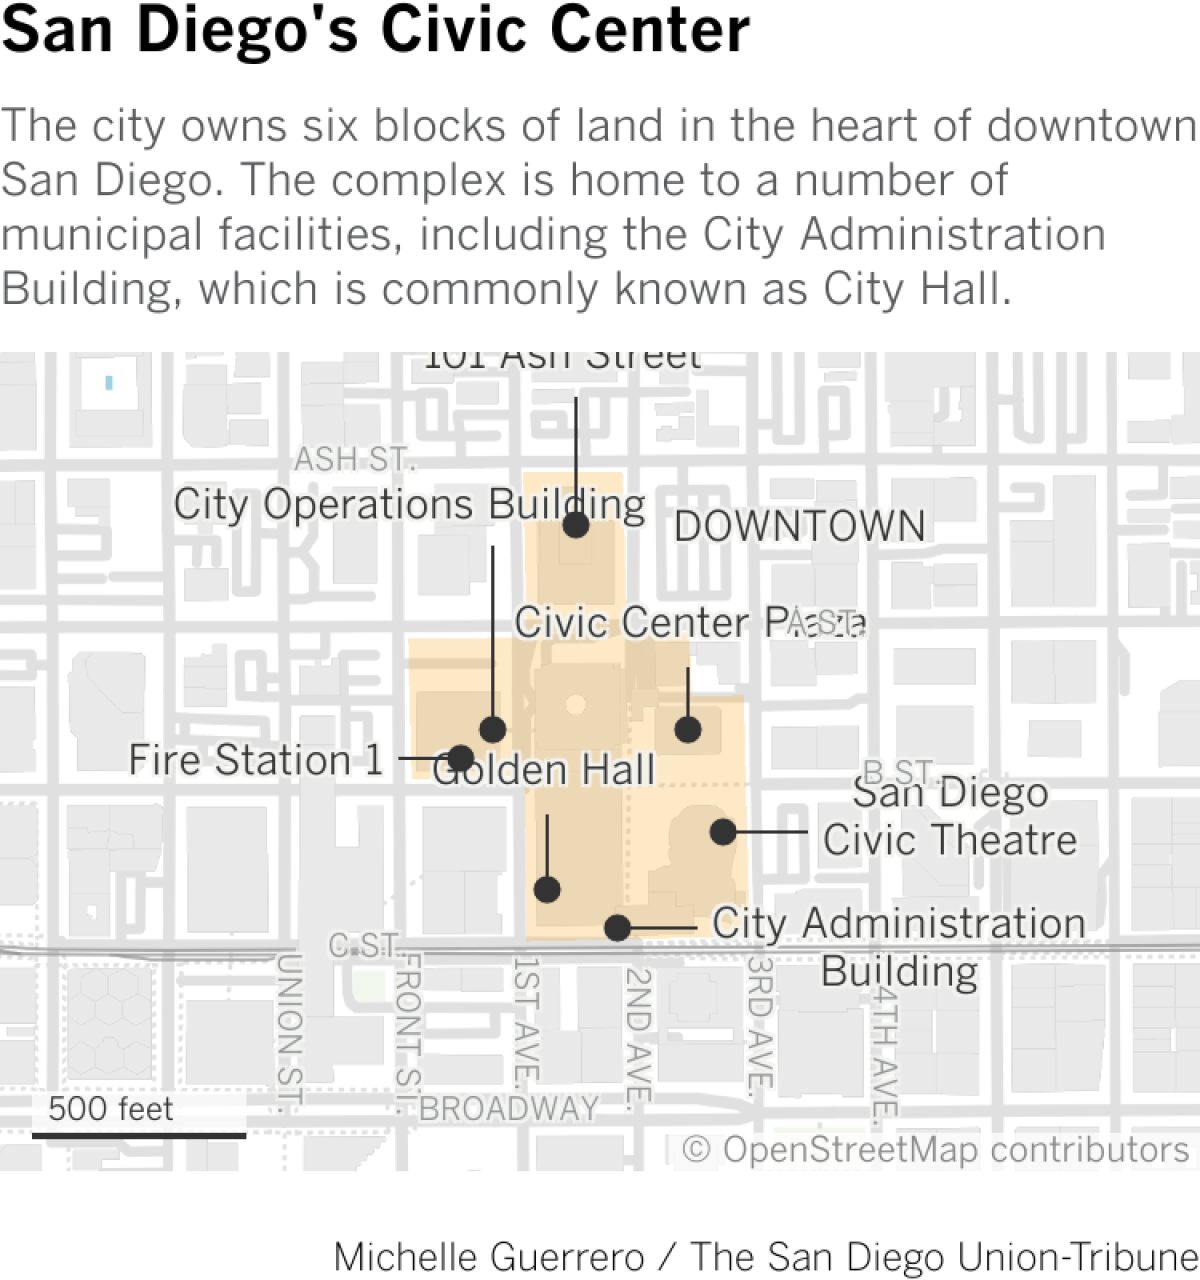 The city owns six blocks of land in the heart of downtown San Diego. The complex is home to a number of municipal facilities, including the City Administration Building, which is commonly known as City Hall.